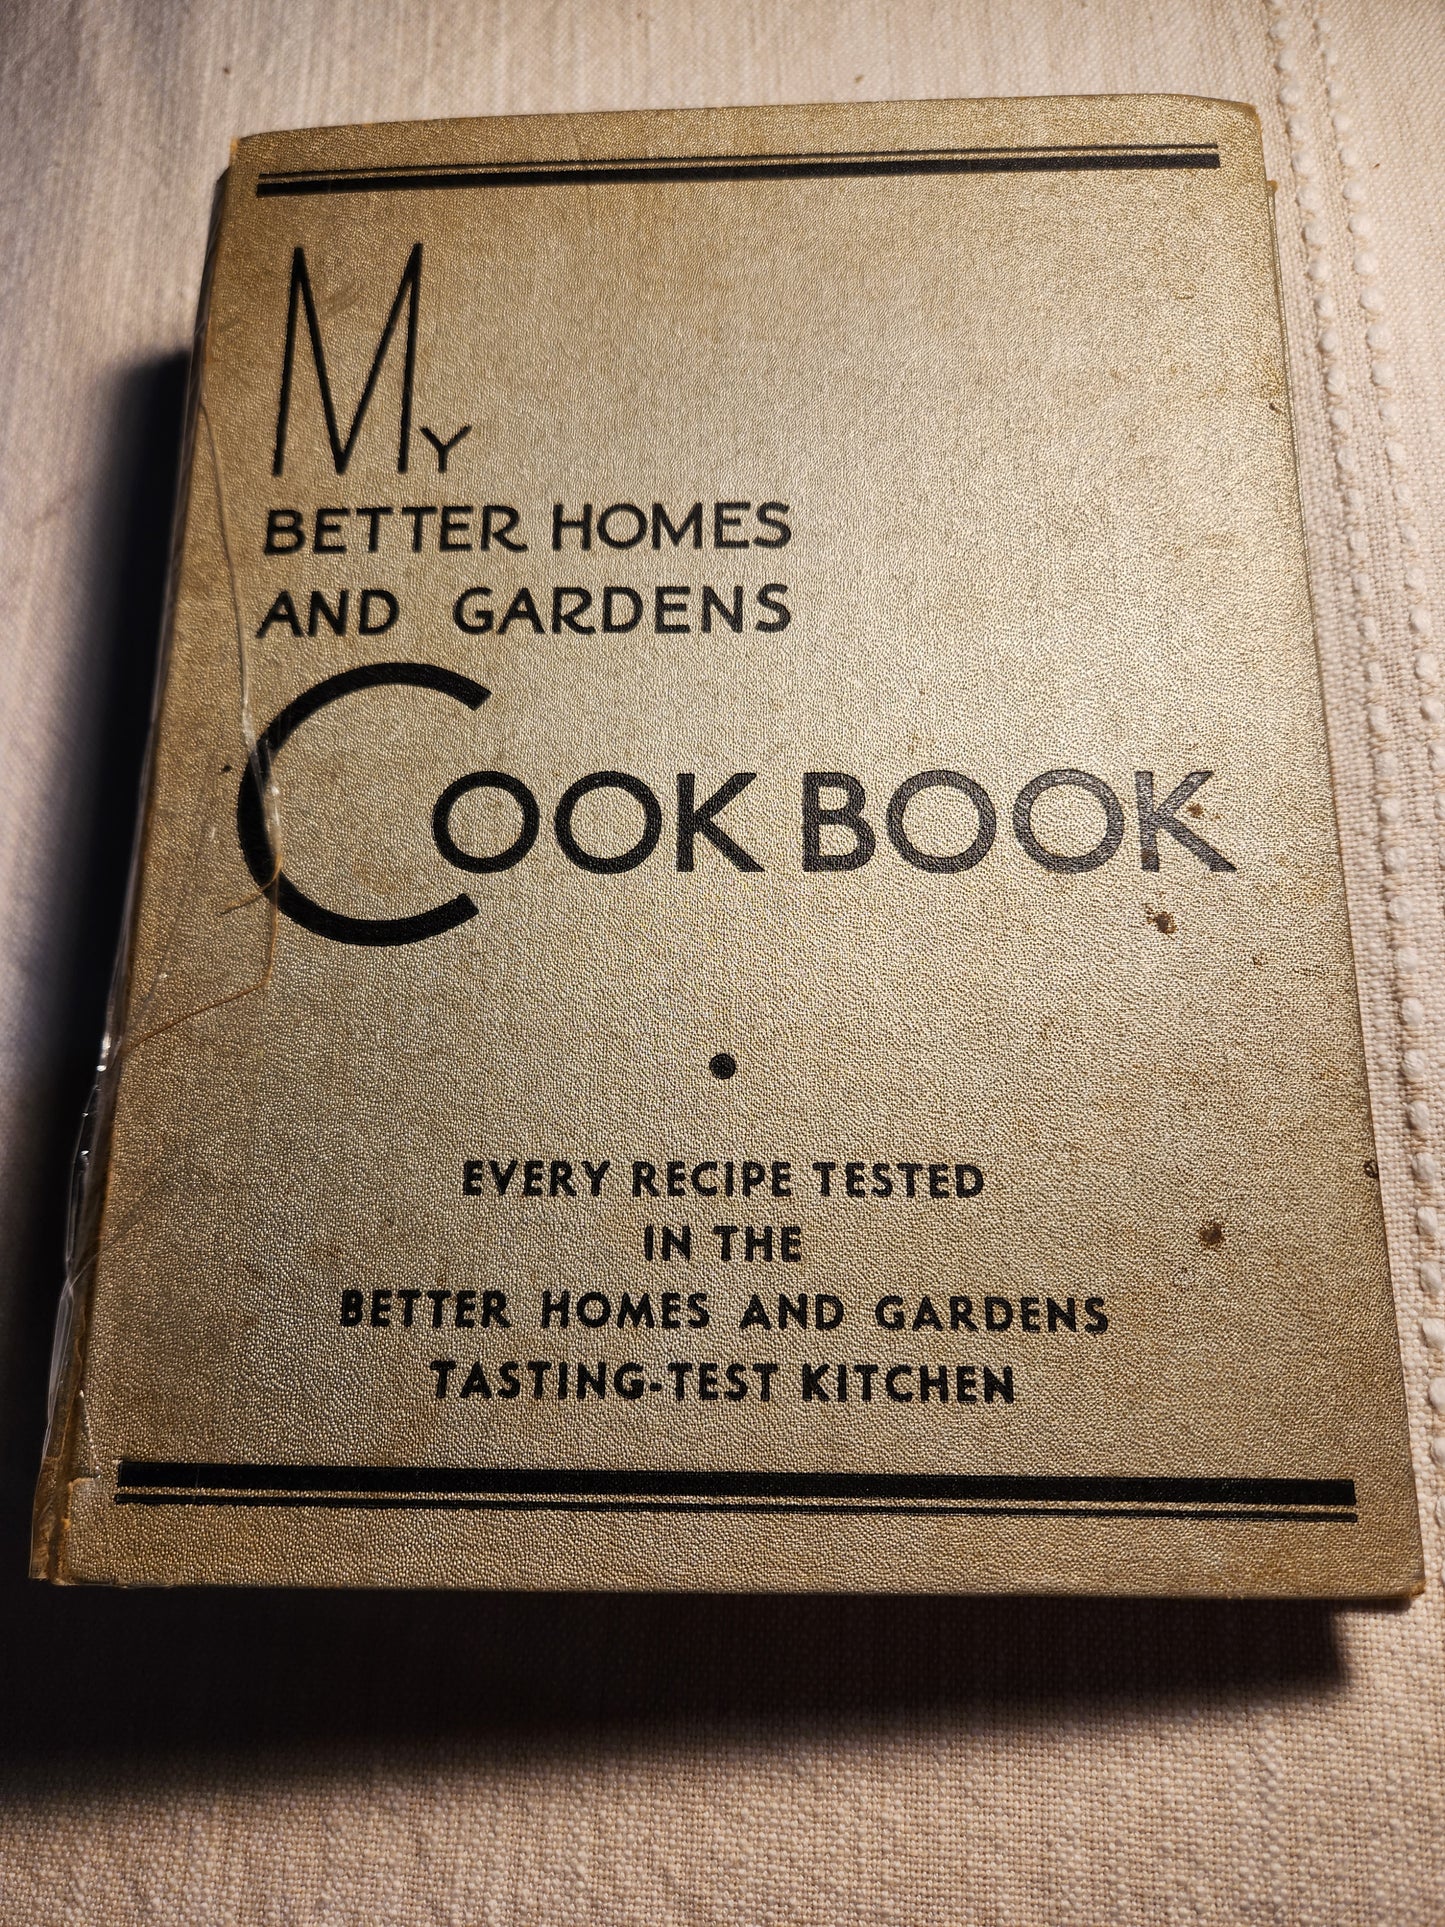 My Better Homes And Gardens Cook Book 13th Printing 1935